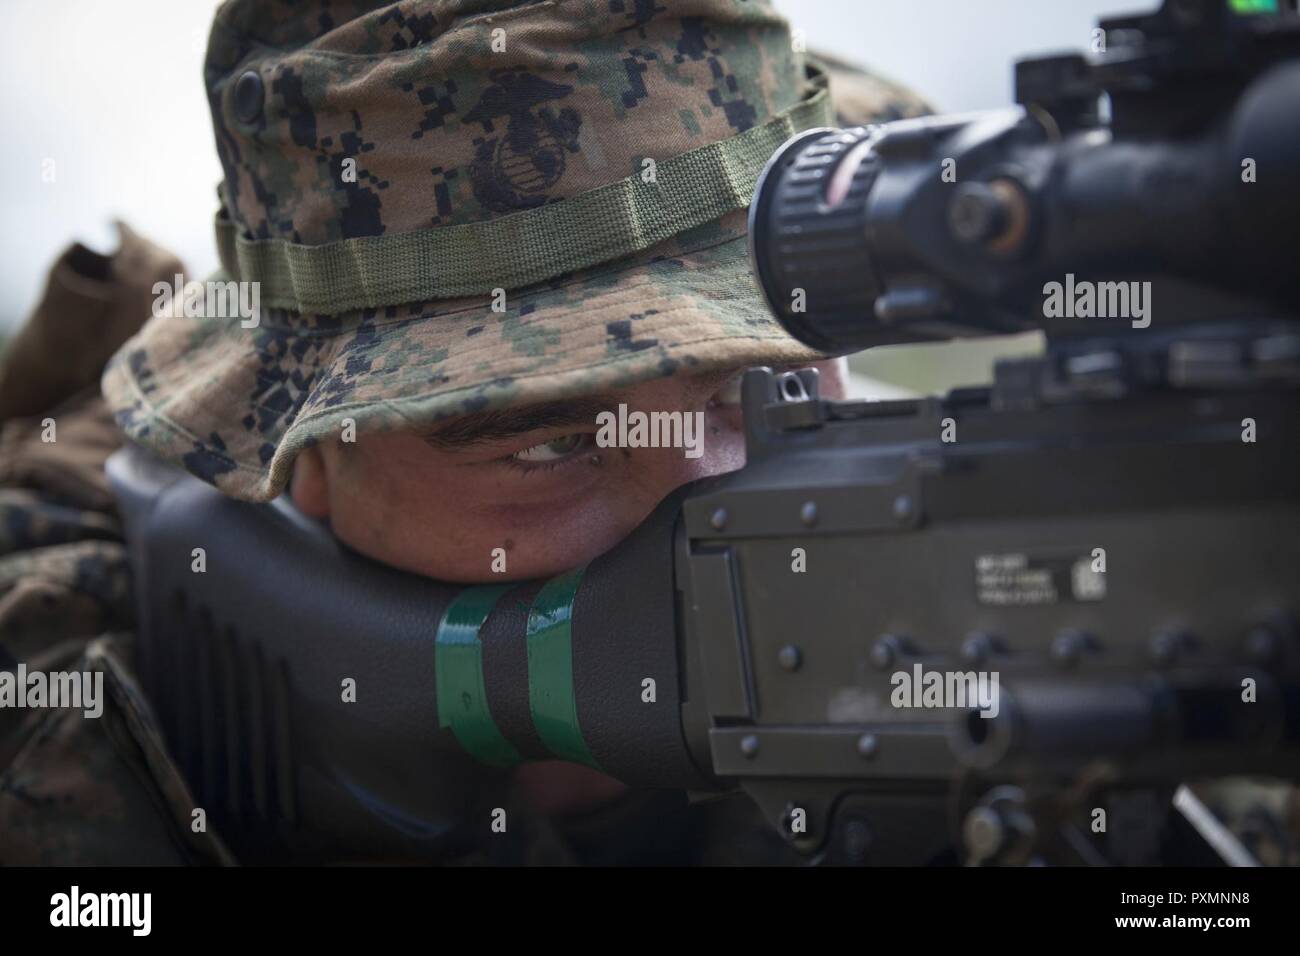 MARINE CORPS BASE HAWAII – Lance Cpl. Cooper Walker, a machine gunner with Kilo Company, 3rd Battalion, 3rd Marine Regiment, looks through his M240B machine gun while conducting gun drills during Exercise Bougainville 1-17.2 at Landing Zone Boondocker aboard Marine Corps Base Hawaii, June 17, 2017. The unit went over procedures and the basics of their roles as infantrymen for Exercise Bougainville, a two-week training exercise to enhance their lethality and effectiveness as a force in readiness. Kilo Co. conducted Military Operation in Urban Terrain training in which Marines practiced clearing Stock Photo